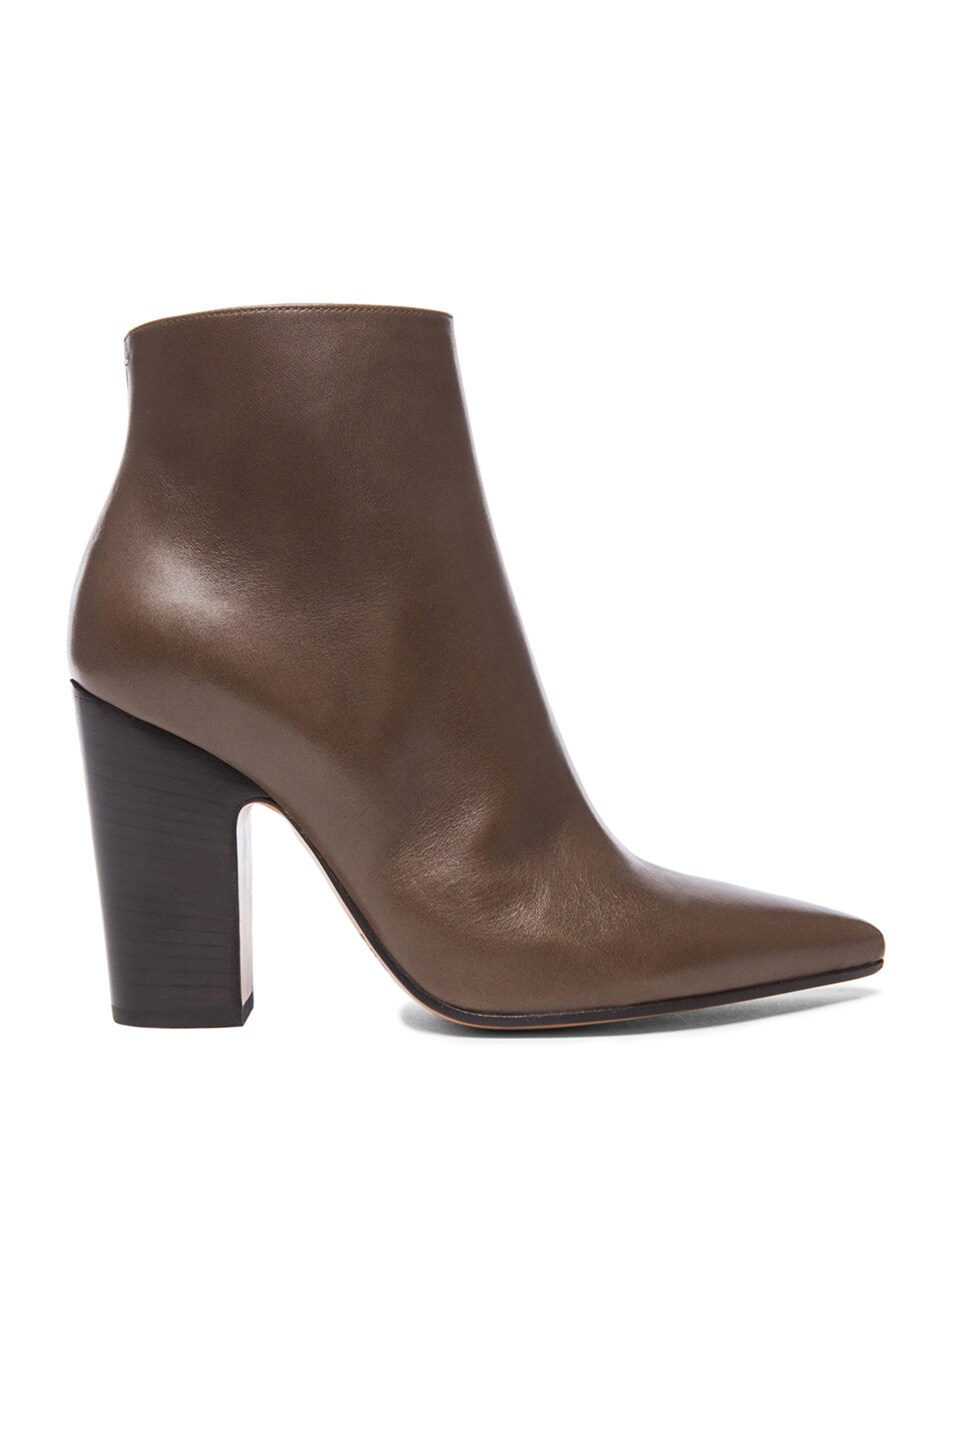 Image 1 of Maison Margiela Brushed Effect Pointed Toe Leather Booties in Graphite